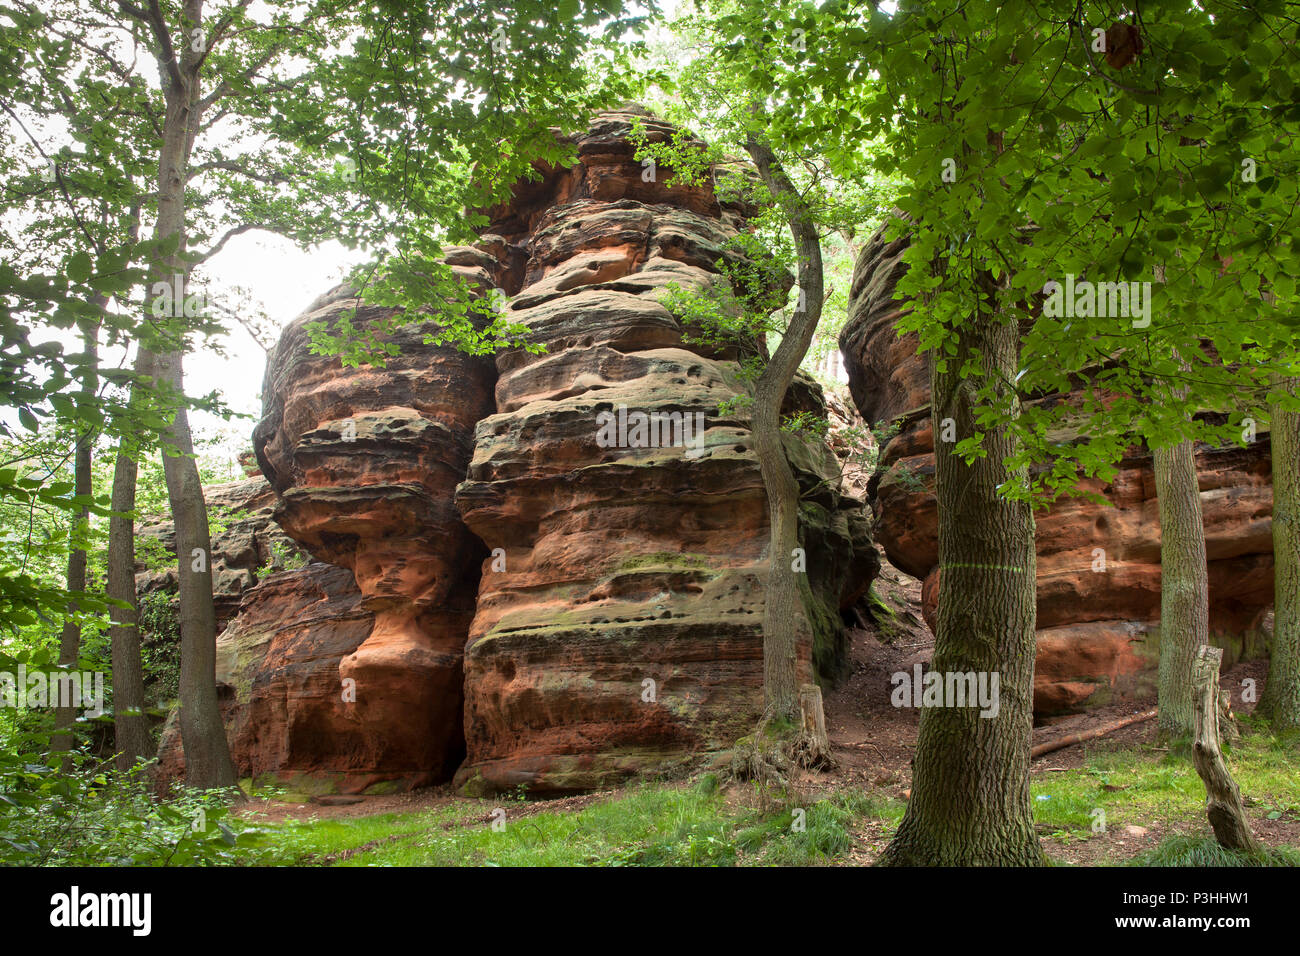 Germany, the Katzensteine (cat stones) in the valley of the Vey creek between Mechernich and Satzvey. The Katzensteine are part of a bunter areal, whi Stock Photo